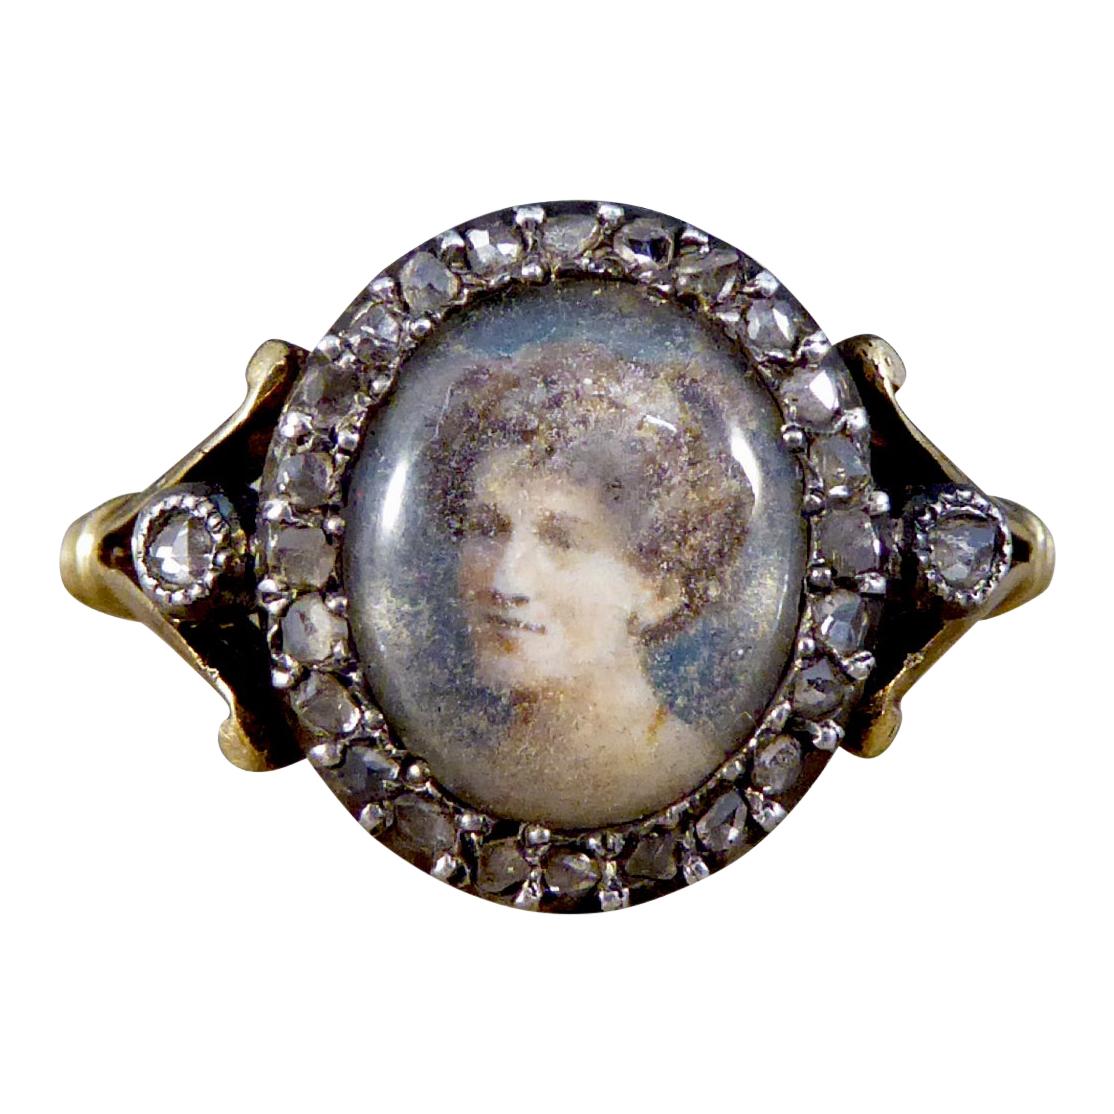 Antique Edwardian Portrait Ring with Rose Cut Diamond Surround 18ct Yellow Gold